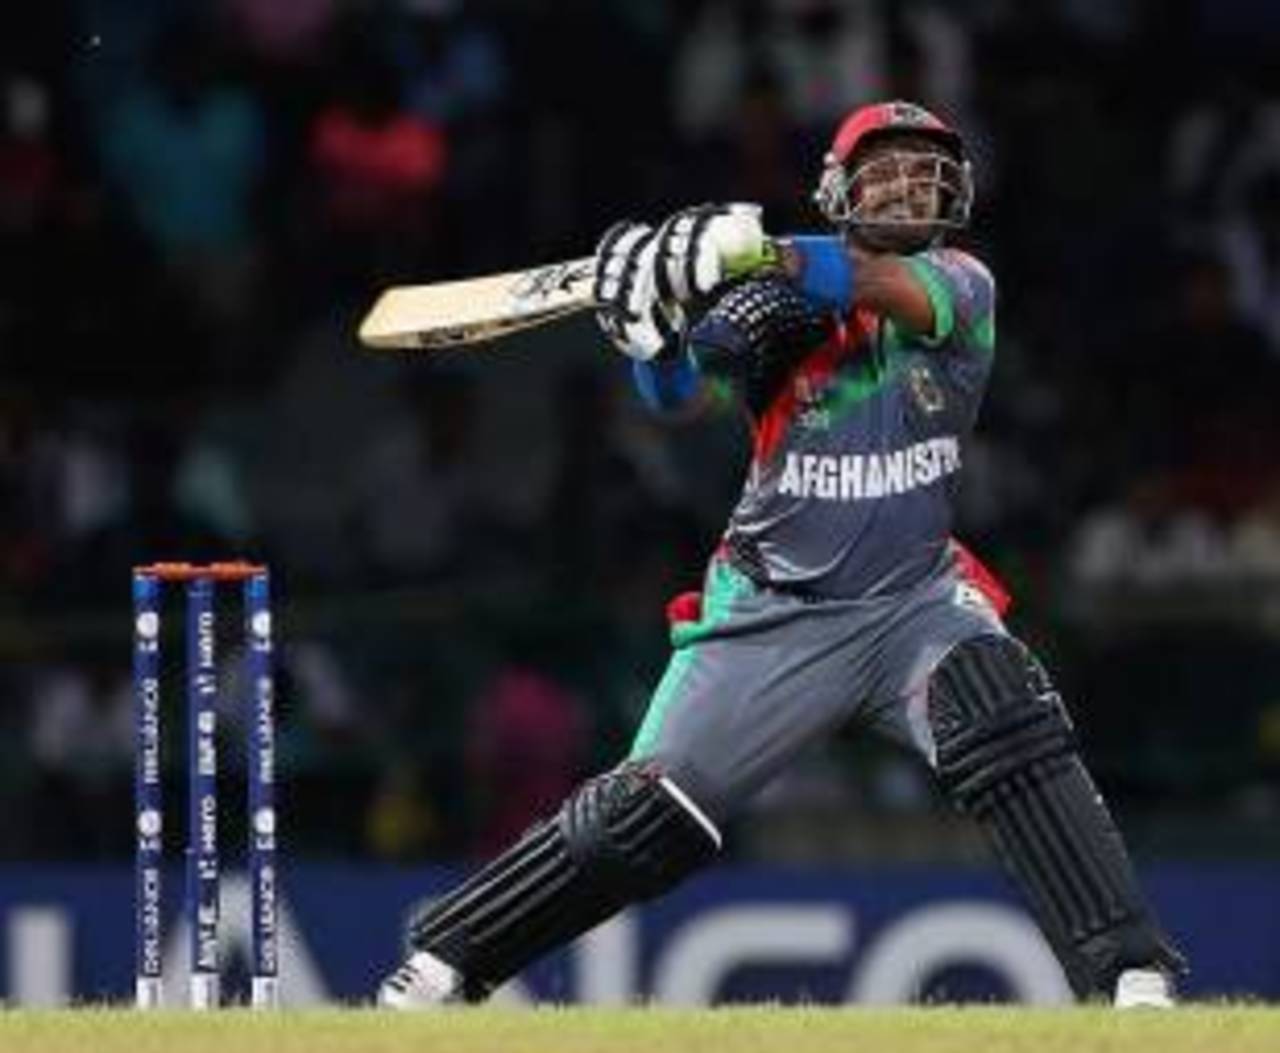 Afghanistan's Mohammad Shahzad scored a double-century to chase 494 against Canada&nbsp;&nbsp;&bull;&nbsp;&nbsp;ICC/Getty